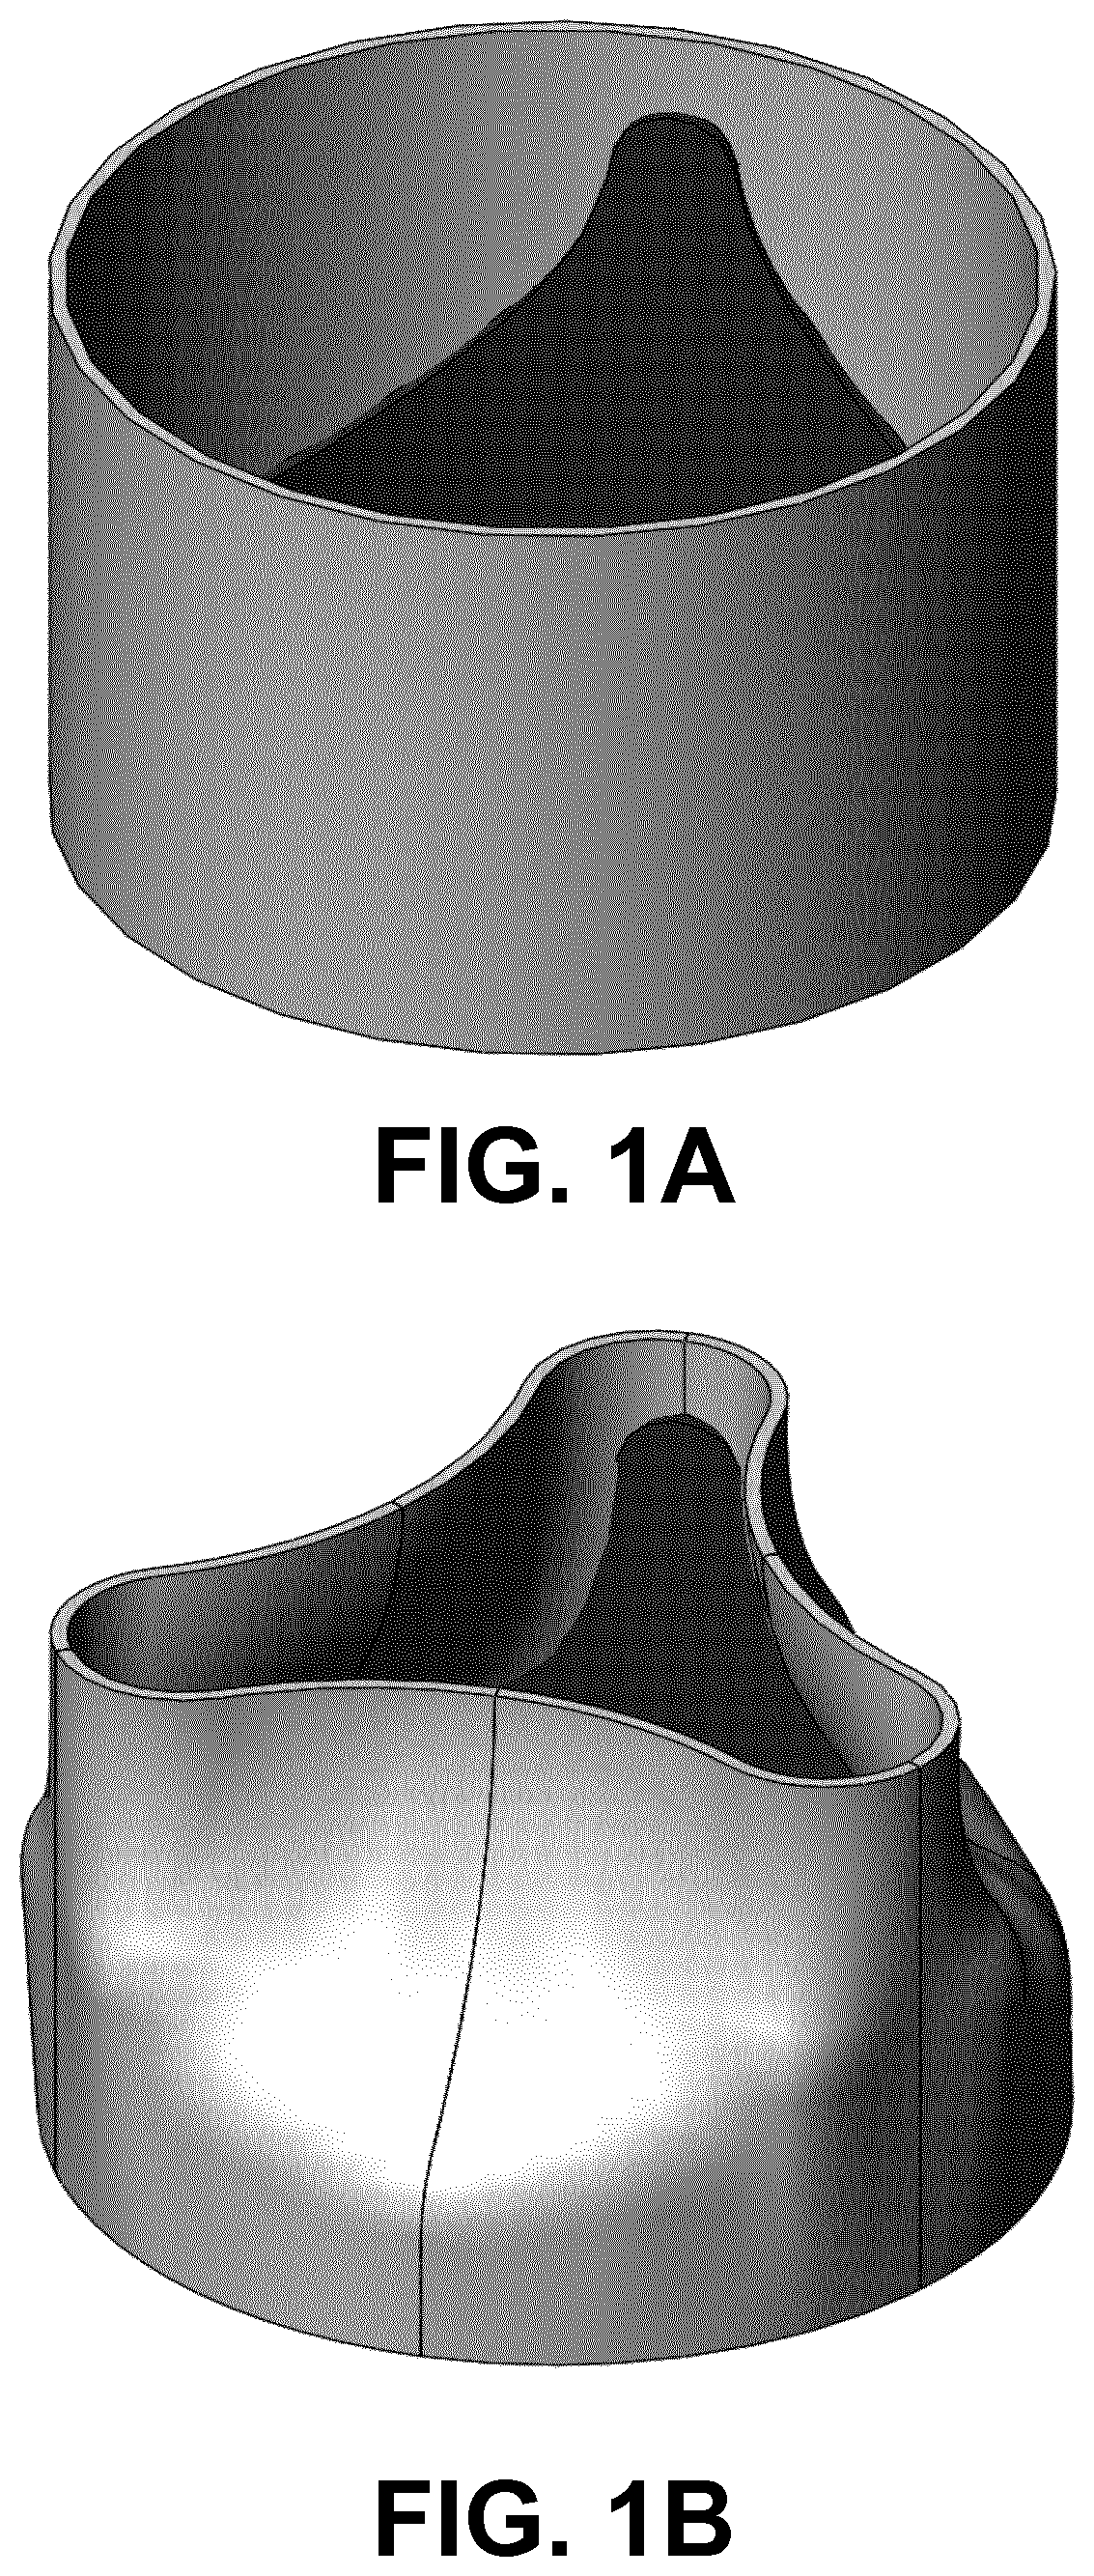 Medical implant preform produced using an inside out flipping method